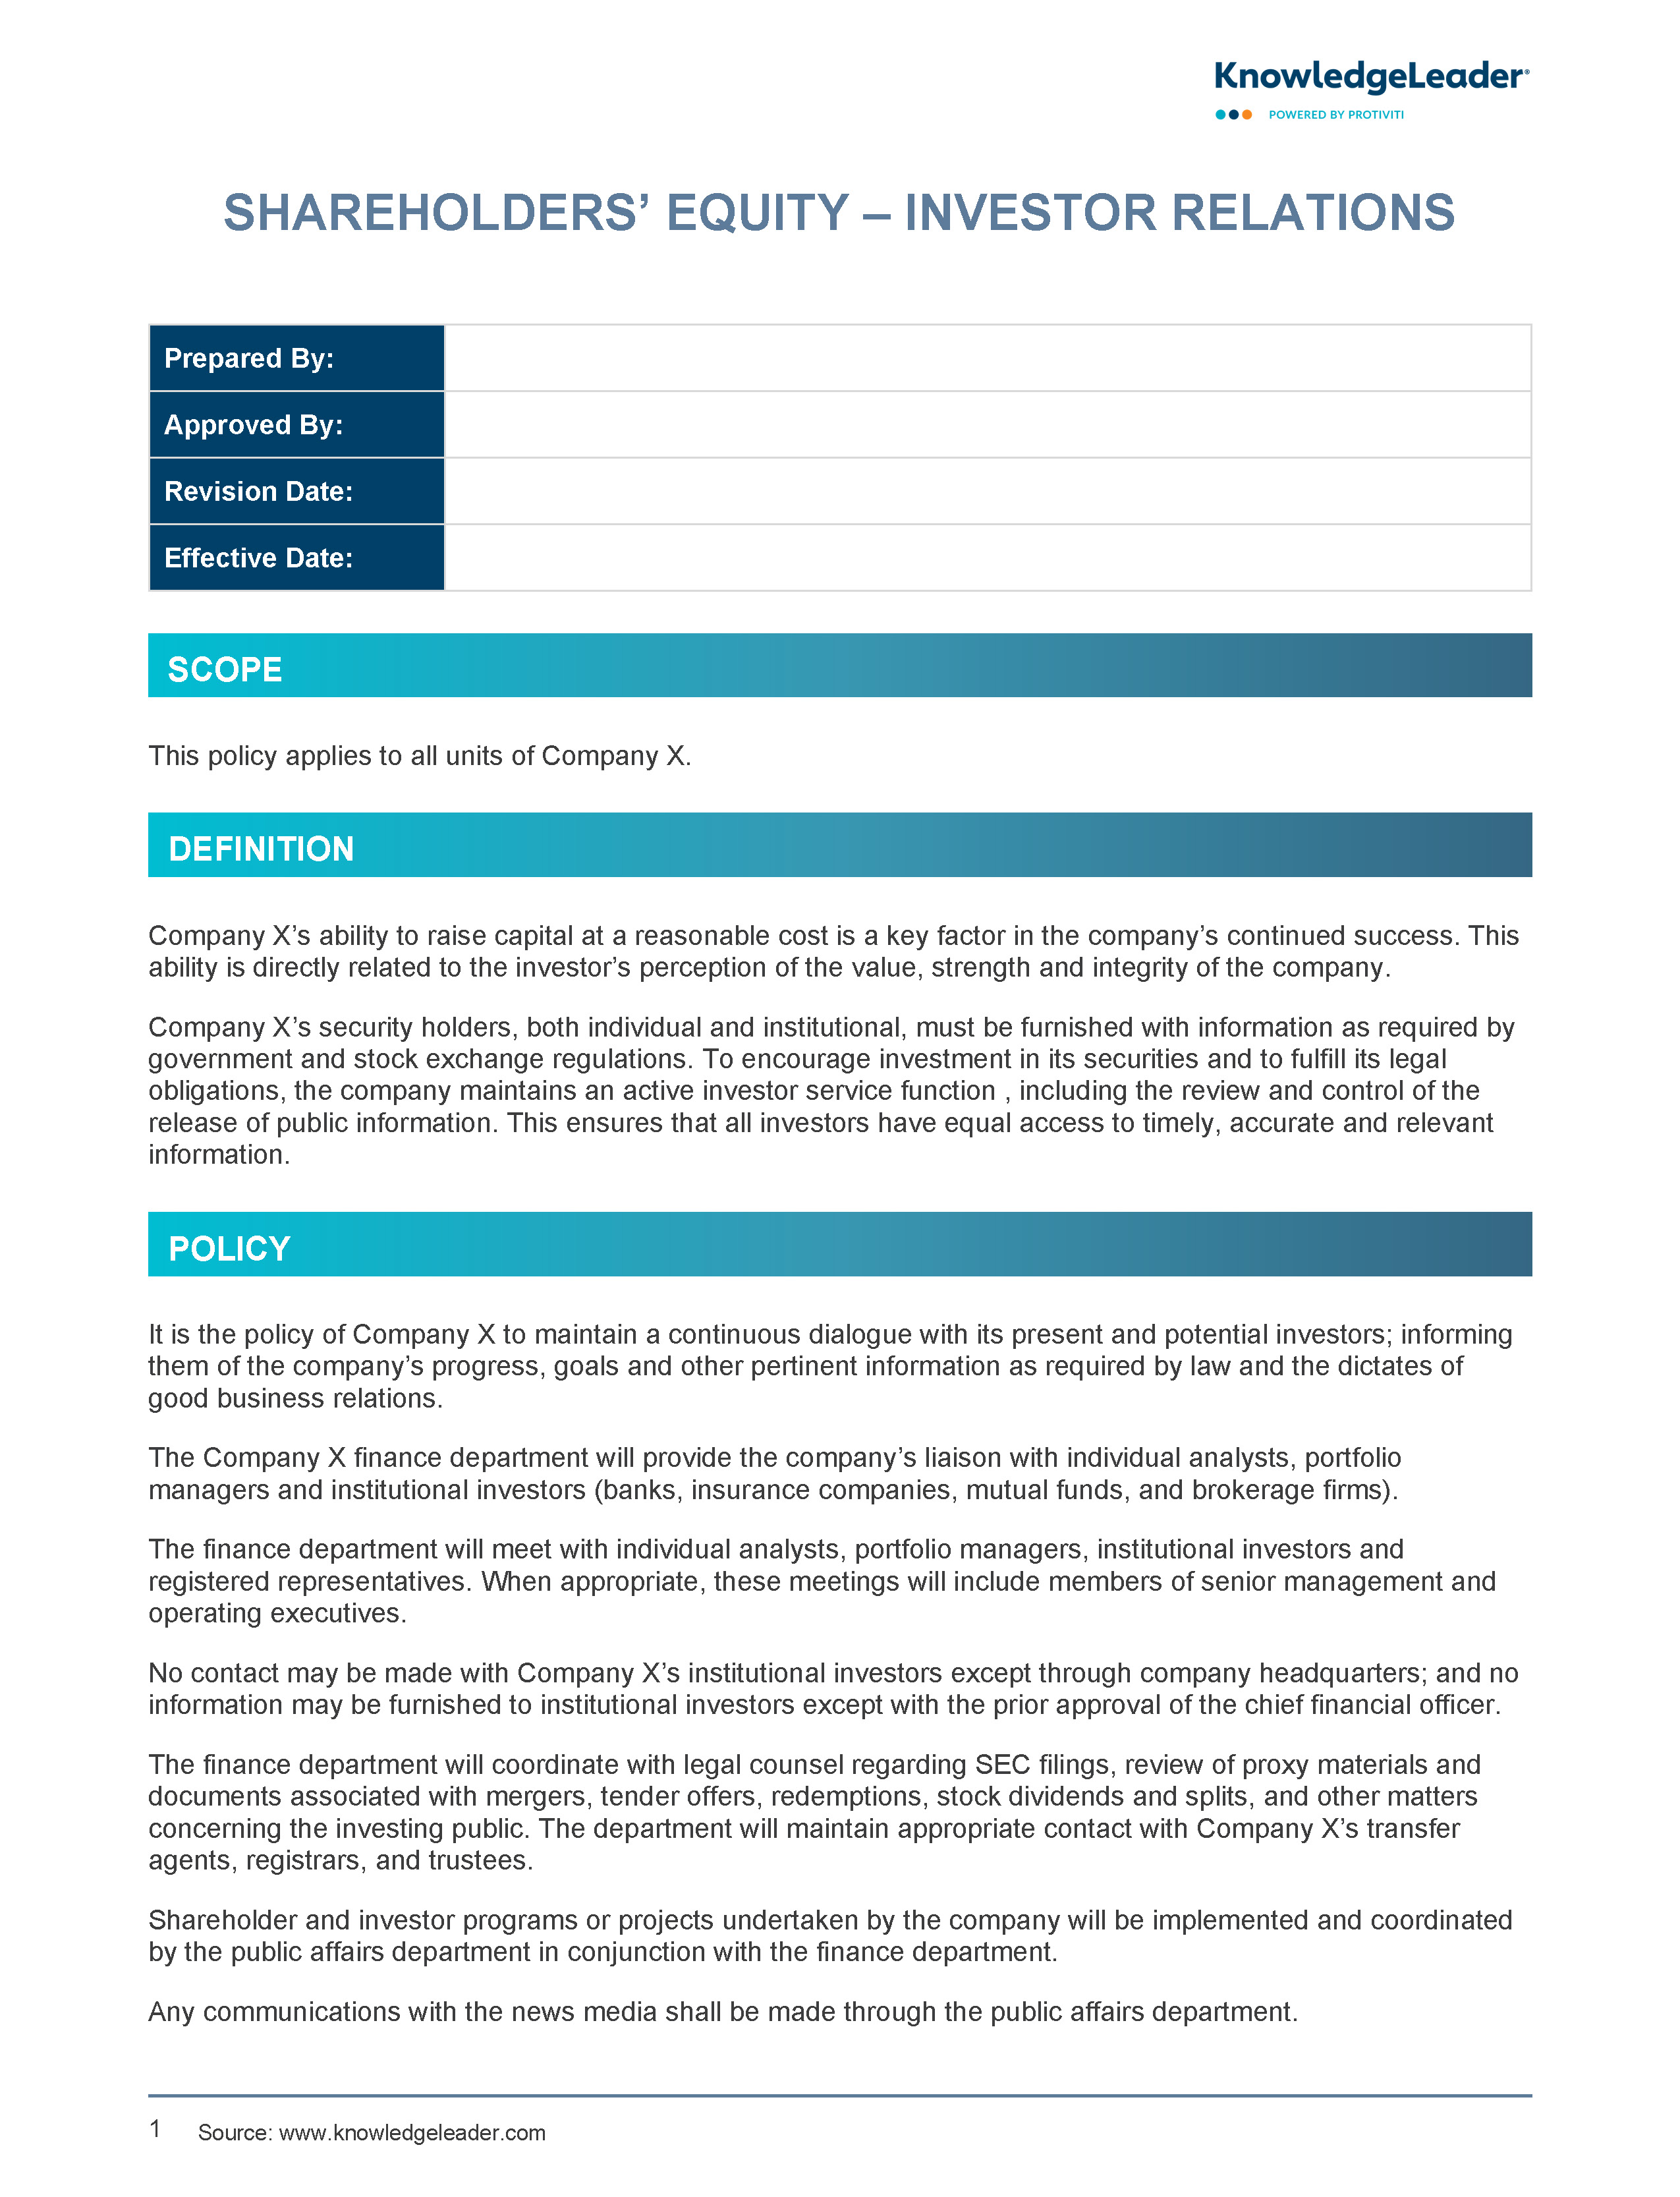 Screenshot of the first page of Shareholder’s Equity – Investor Relations Policy